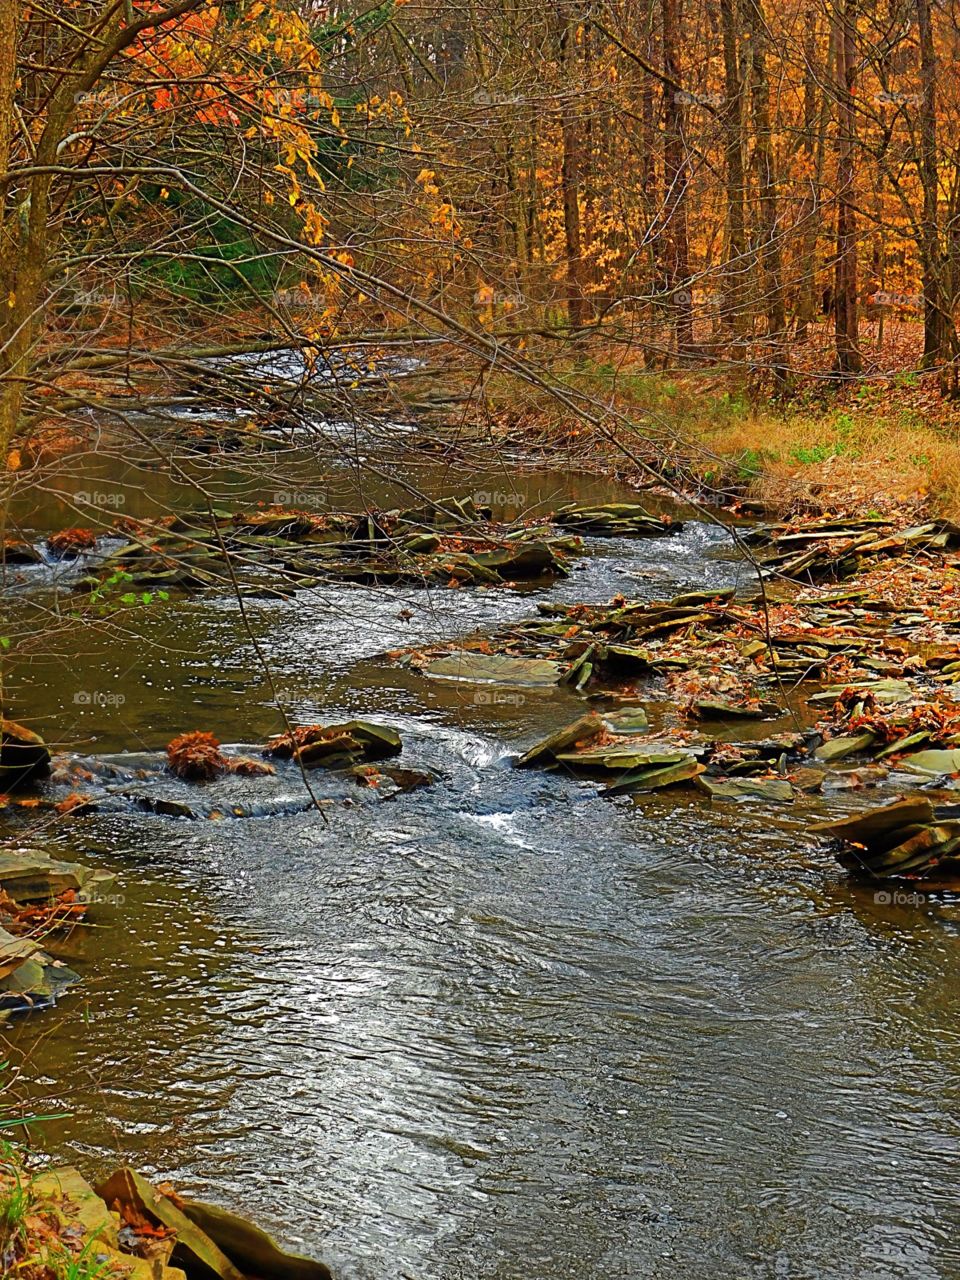 Creek in the Autumn Leaves